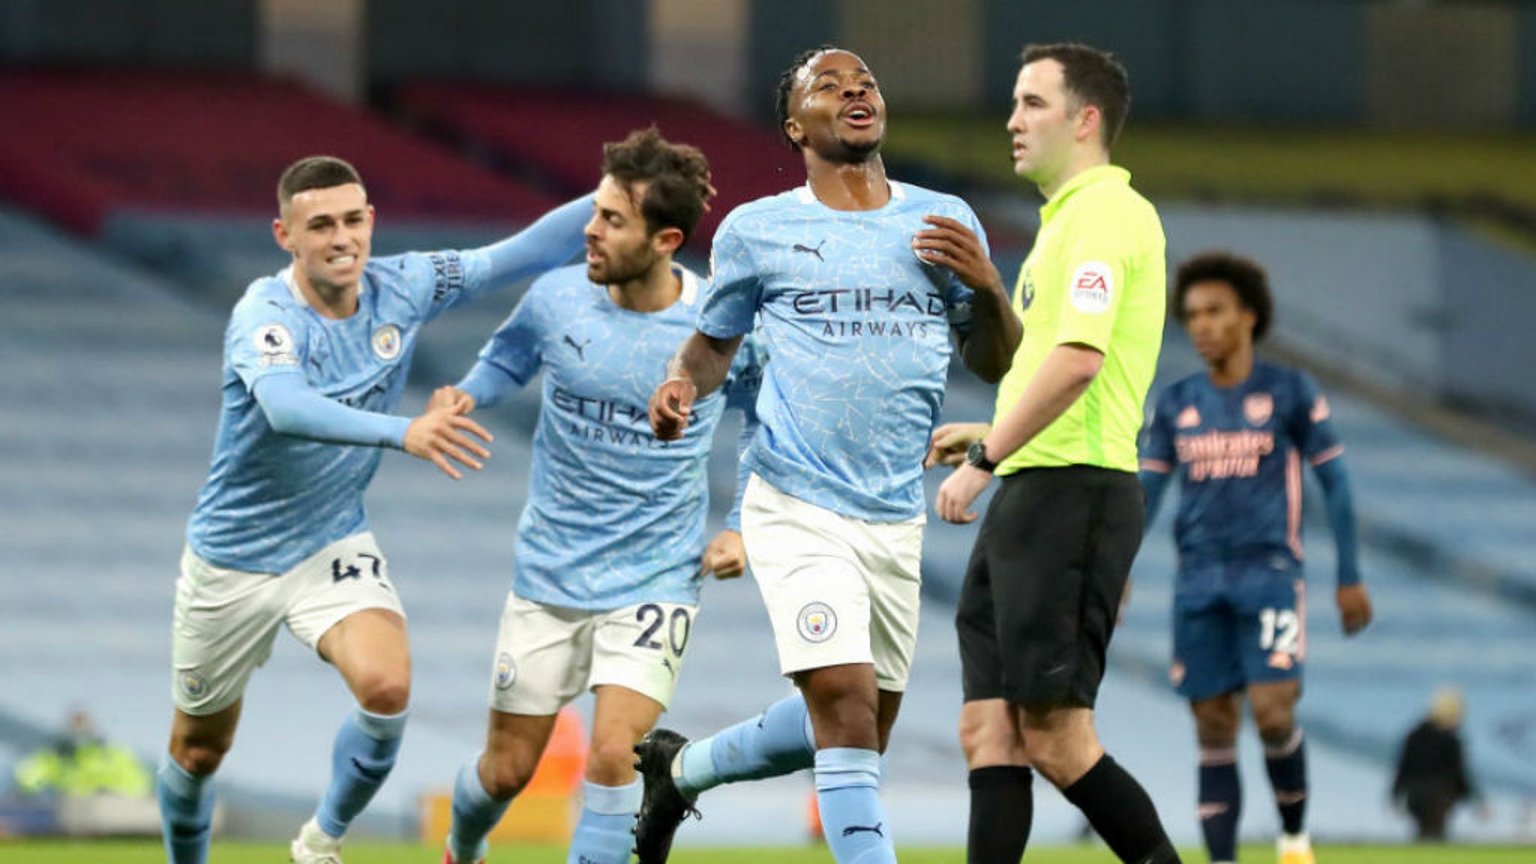 Skipper Sterling fires City to victory